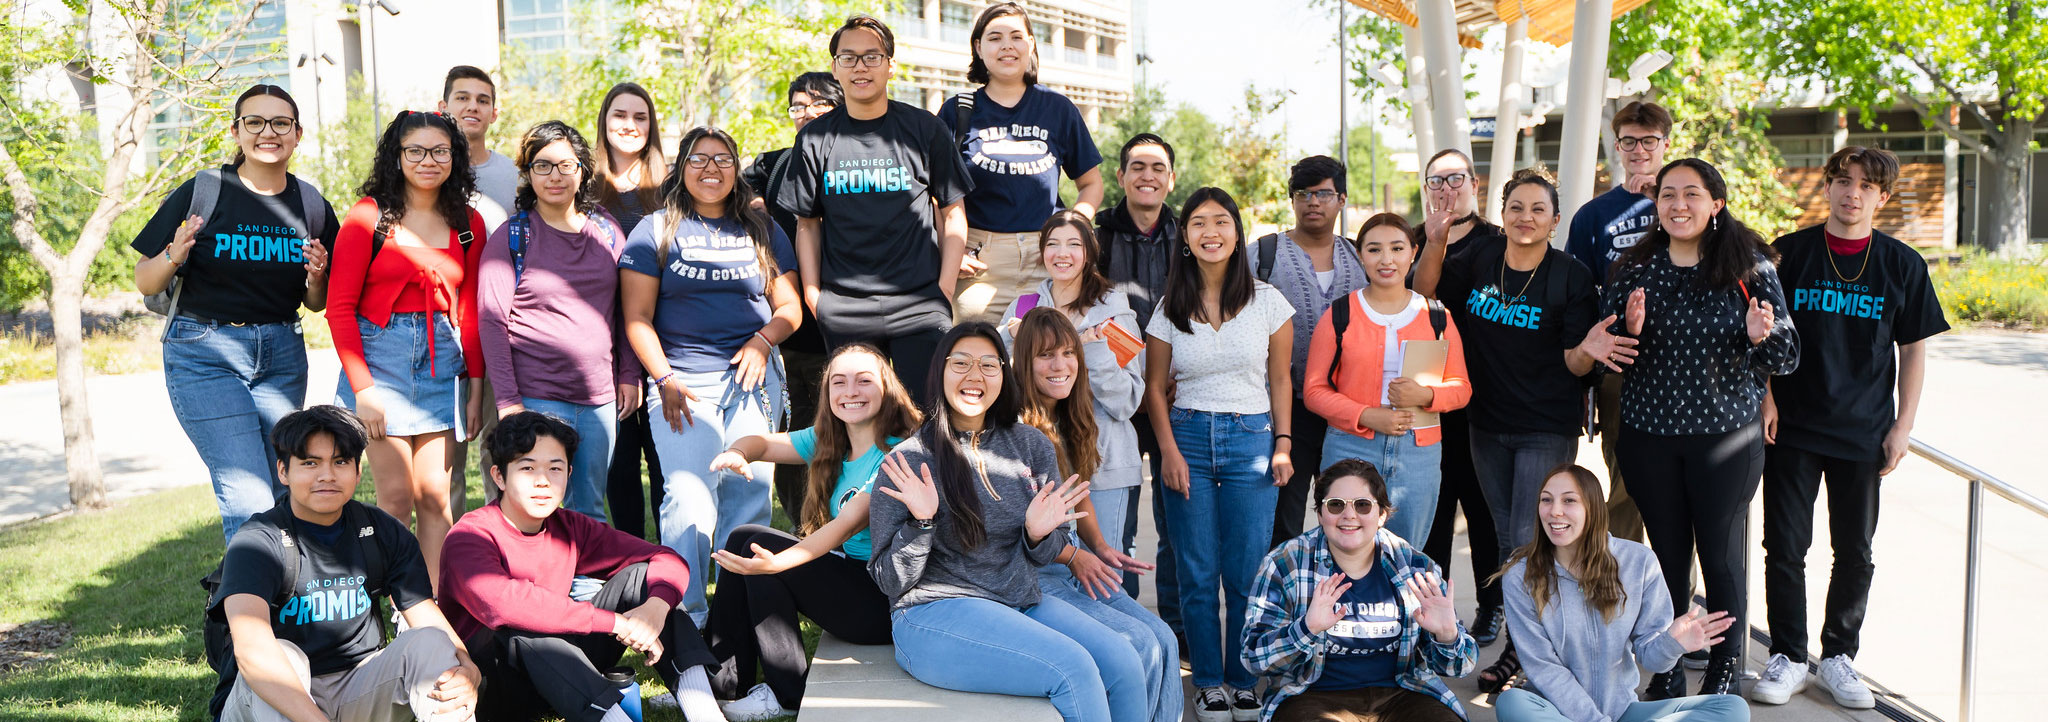 San Diego Promise enrollment reaches all-time high at SDCCD Featured Image